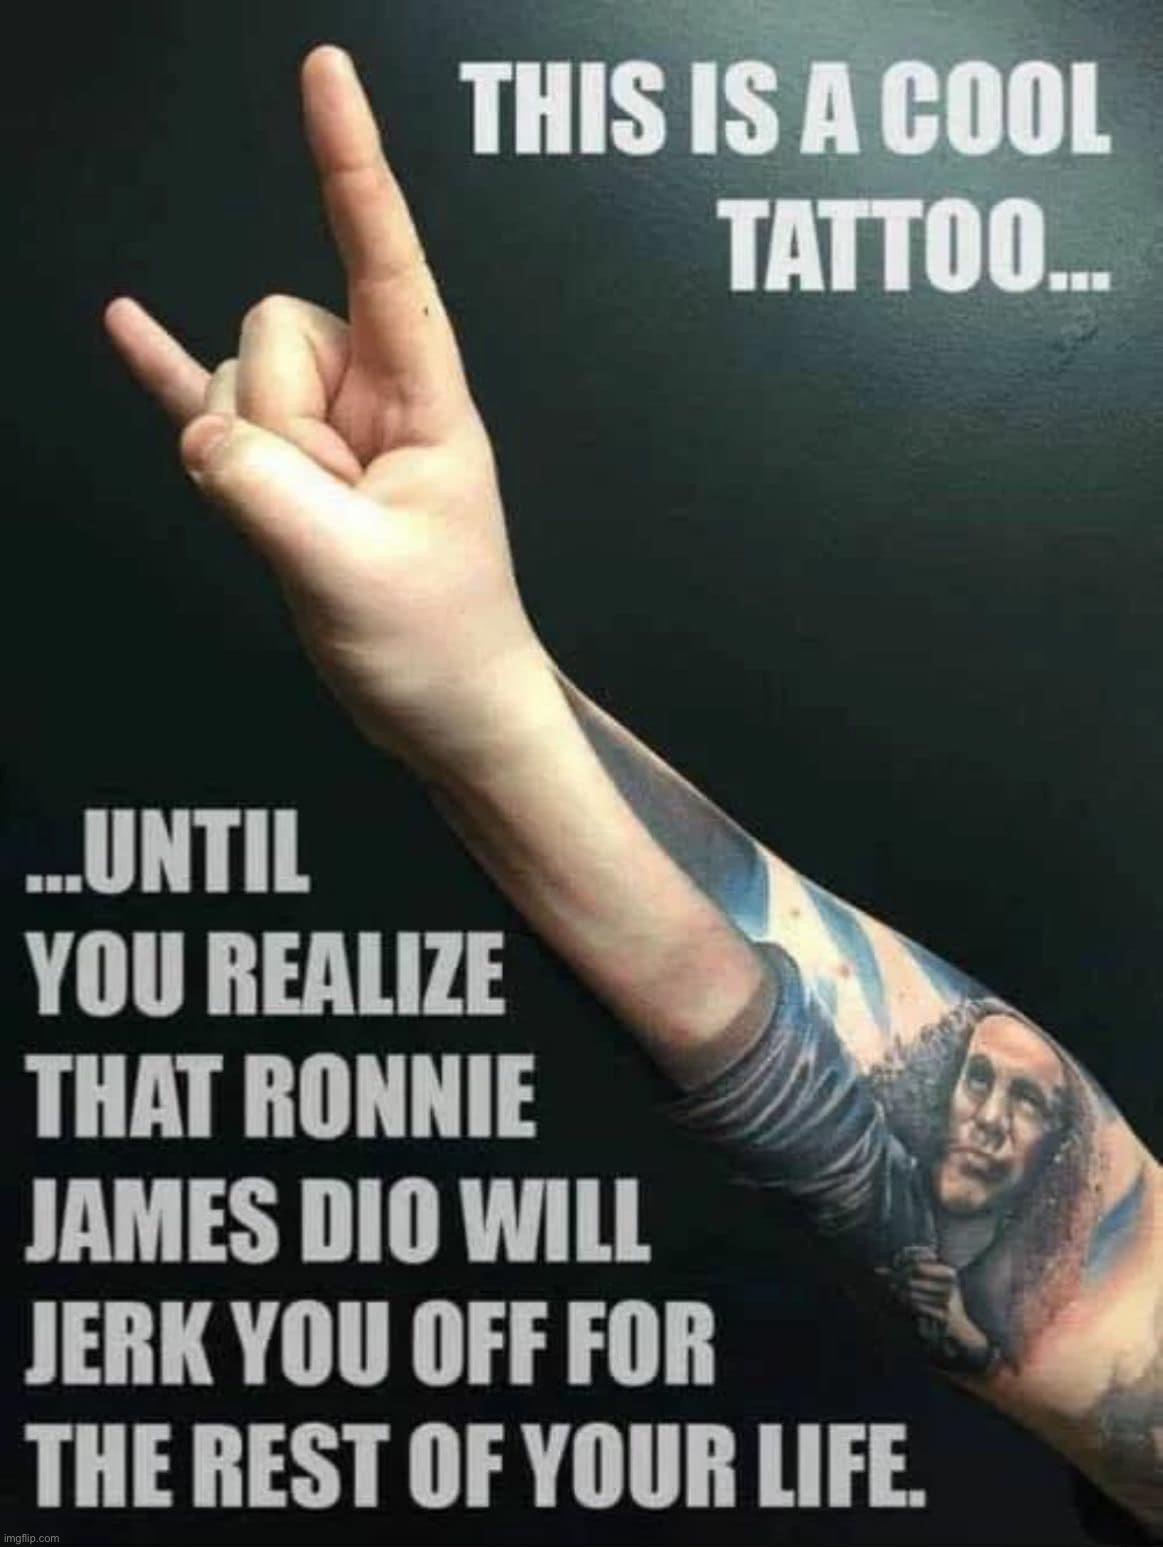 oof | image tagged in ronnie james dio masturbation tattoo | made w/ Imgflip meme maker